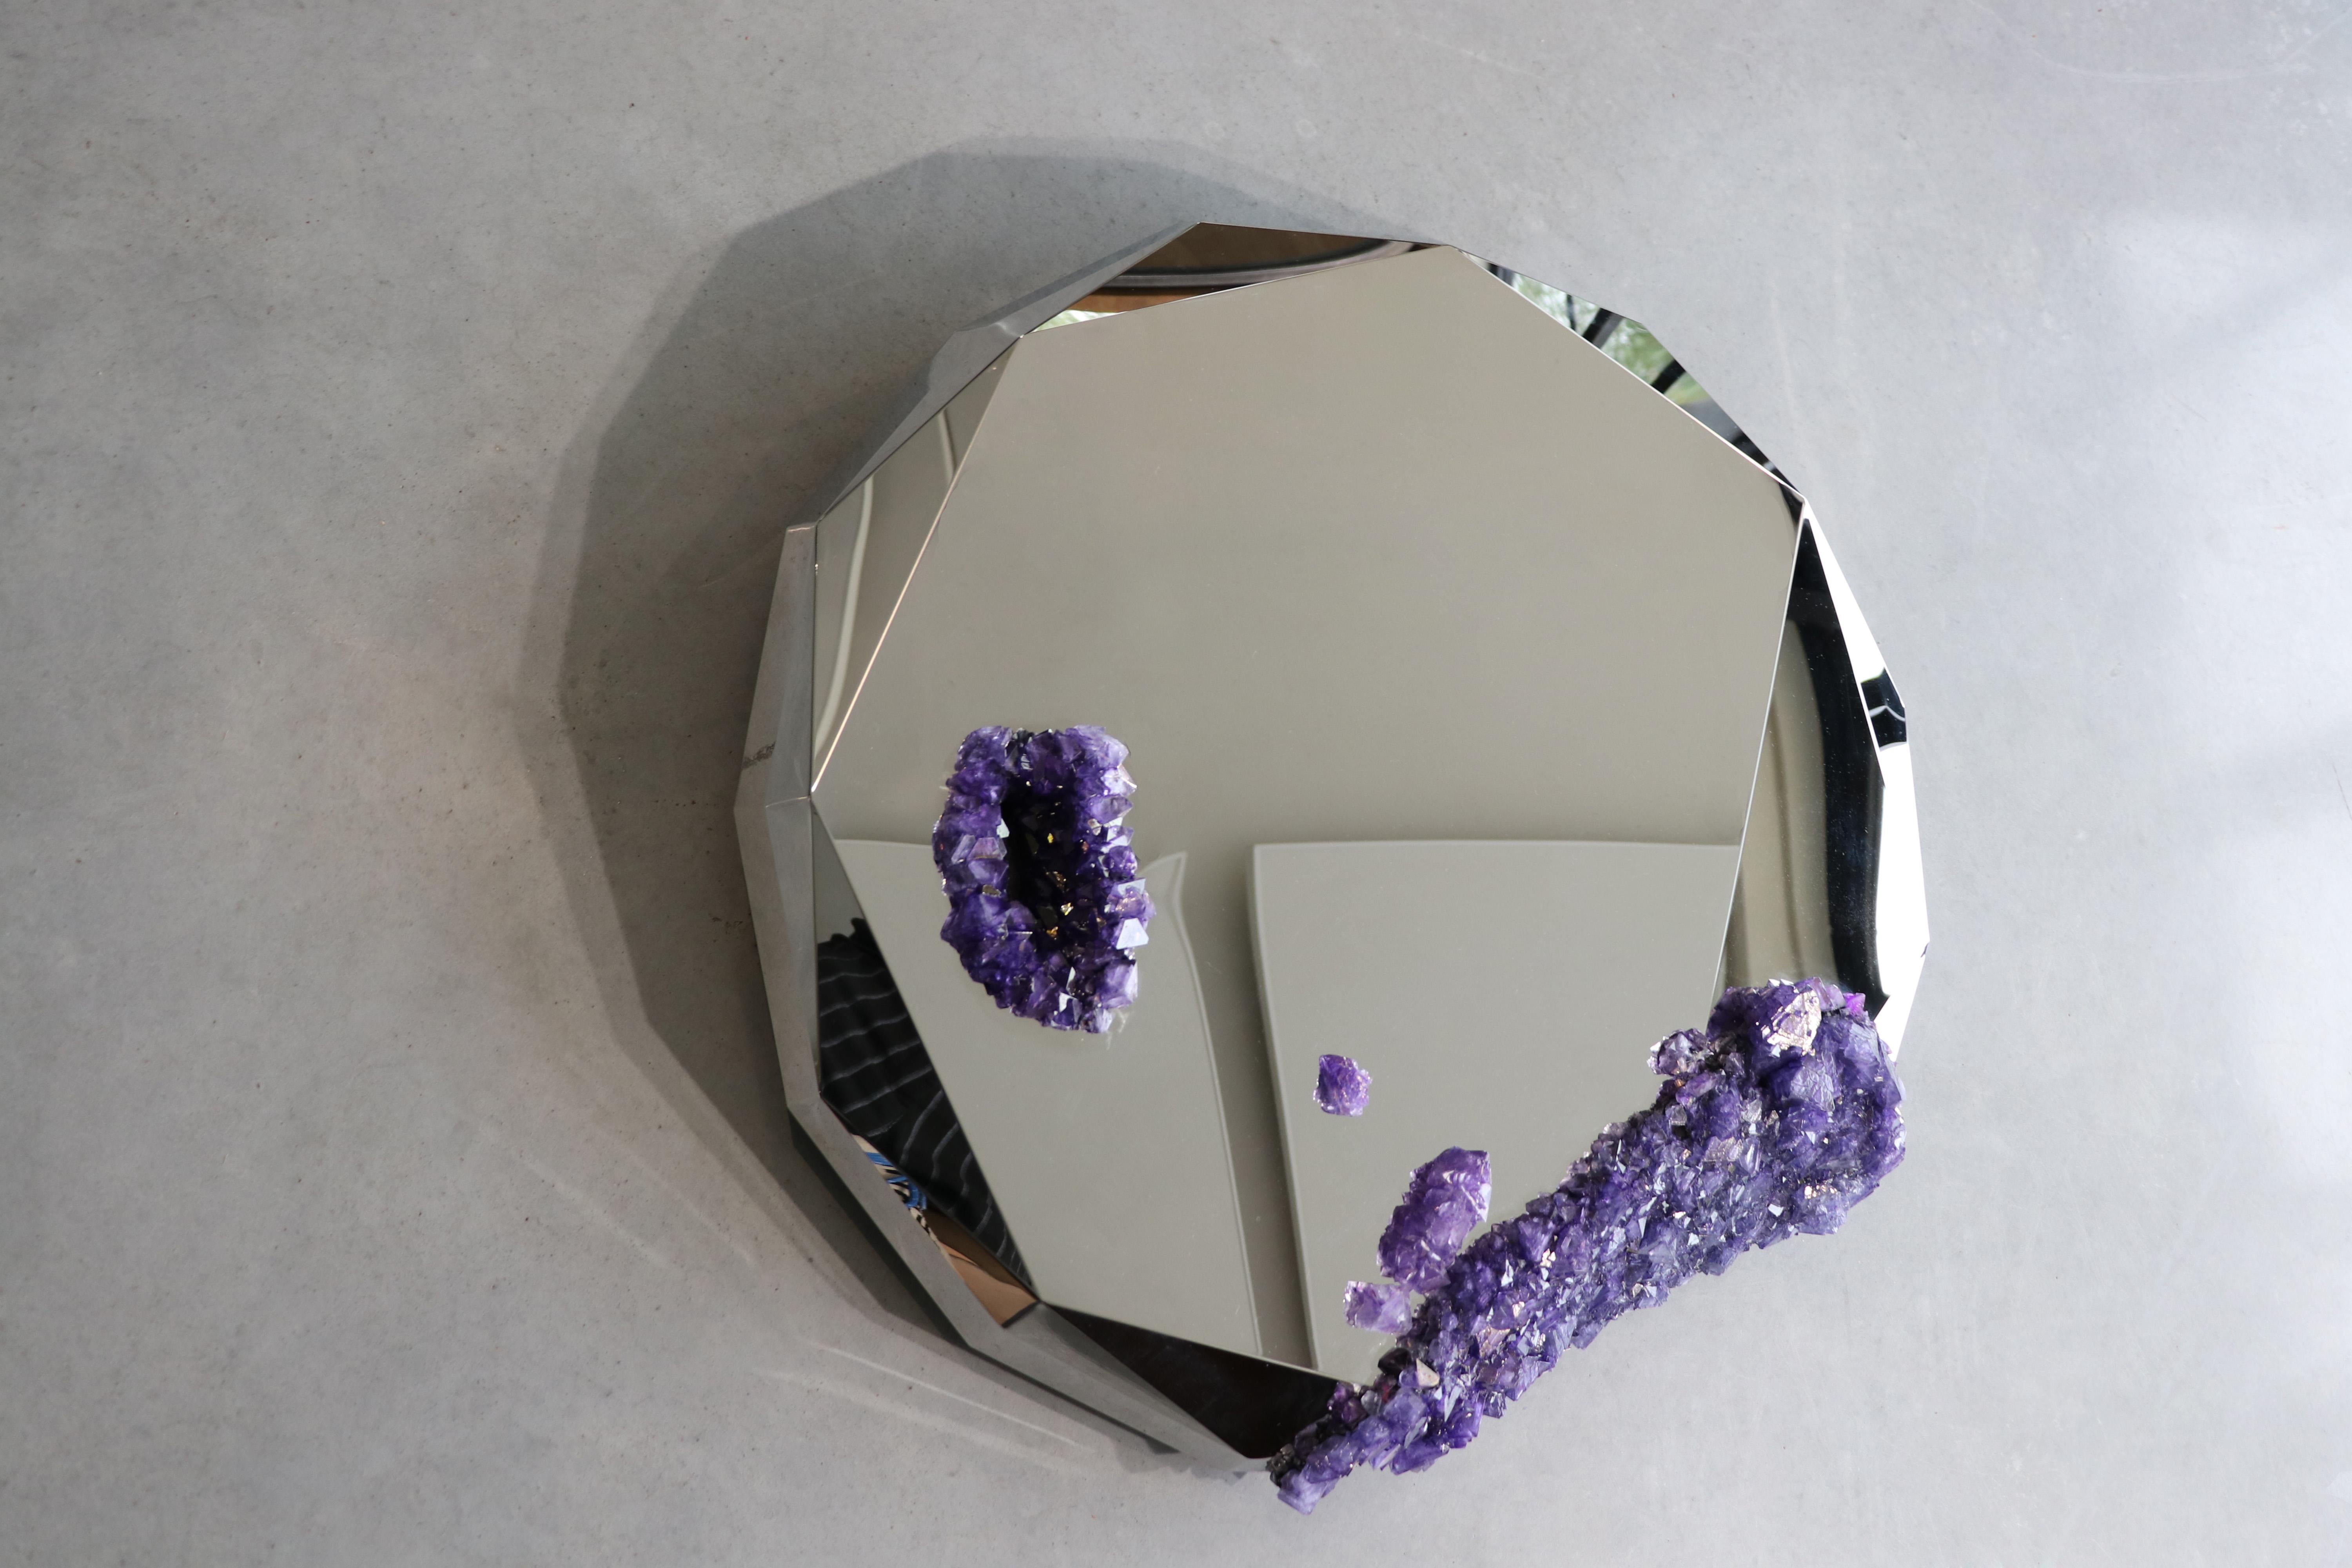 Once upon a time Hypnos mirror by Mark Sturkenboom
Edition of 10
Dimensions: 74 × 75 × 8 cm
Material: Stainless steel, mineral crystals

Our environment is cluttered with the artifacts of human habitation, leading one to wonder, “How would the